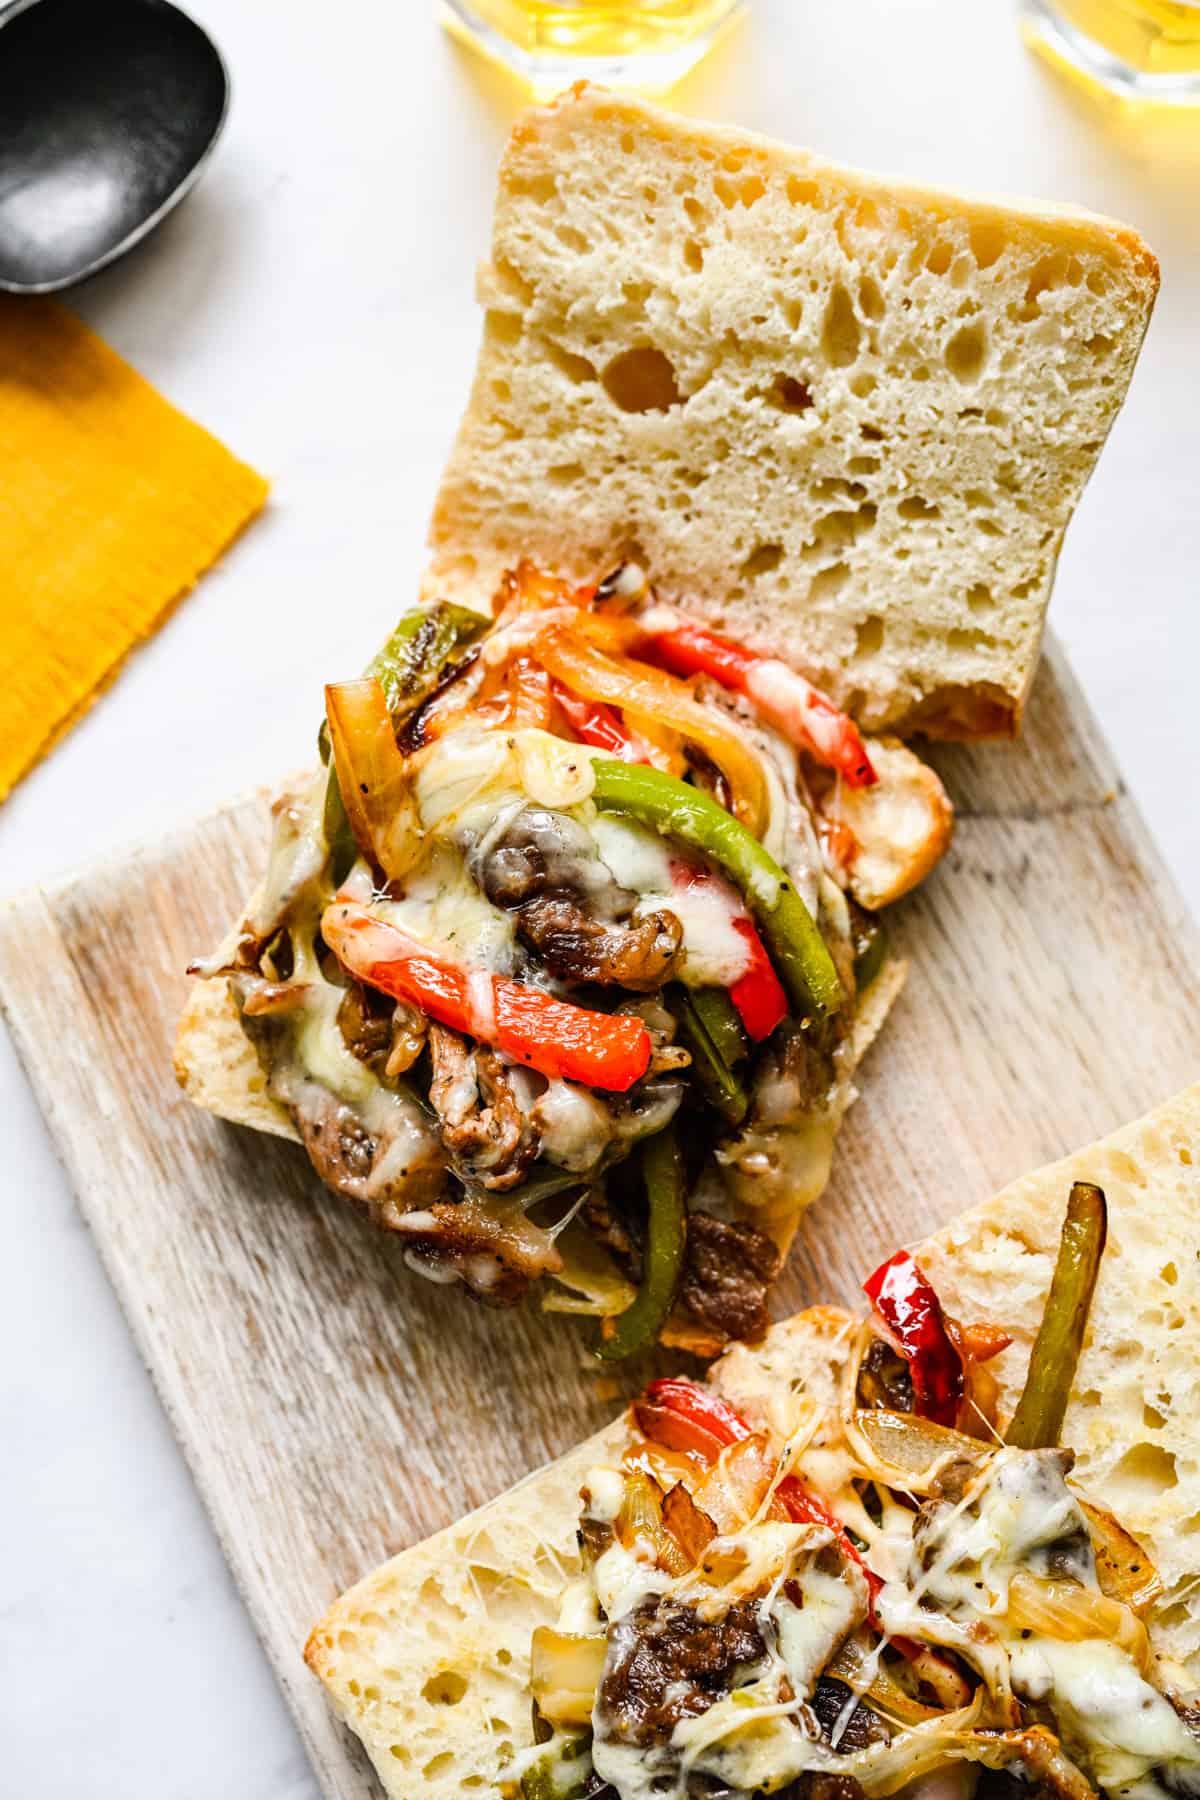 Philly cheesesteak served on crusty bread.